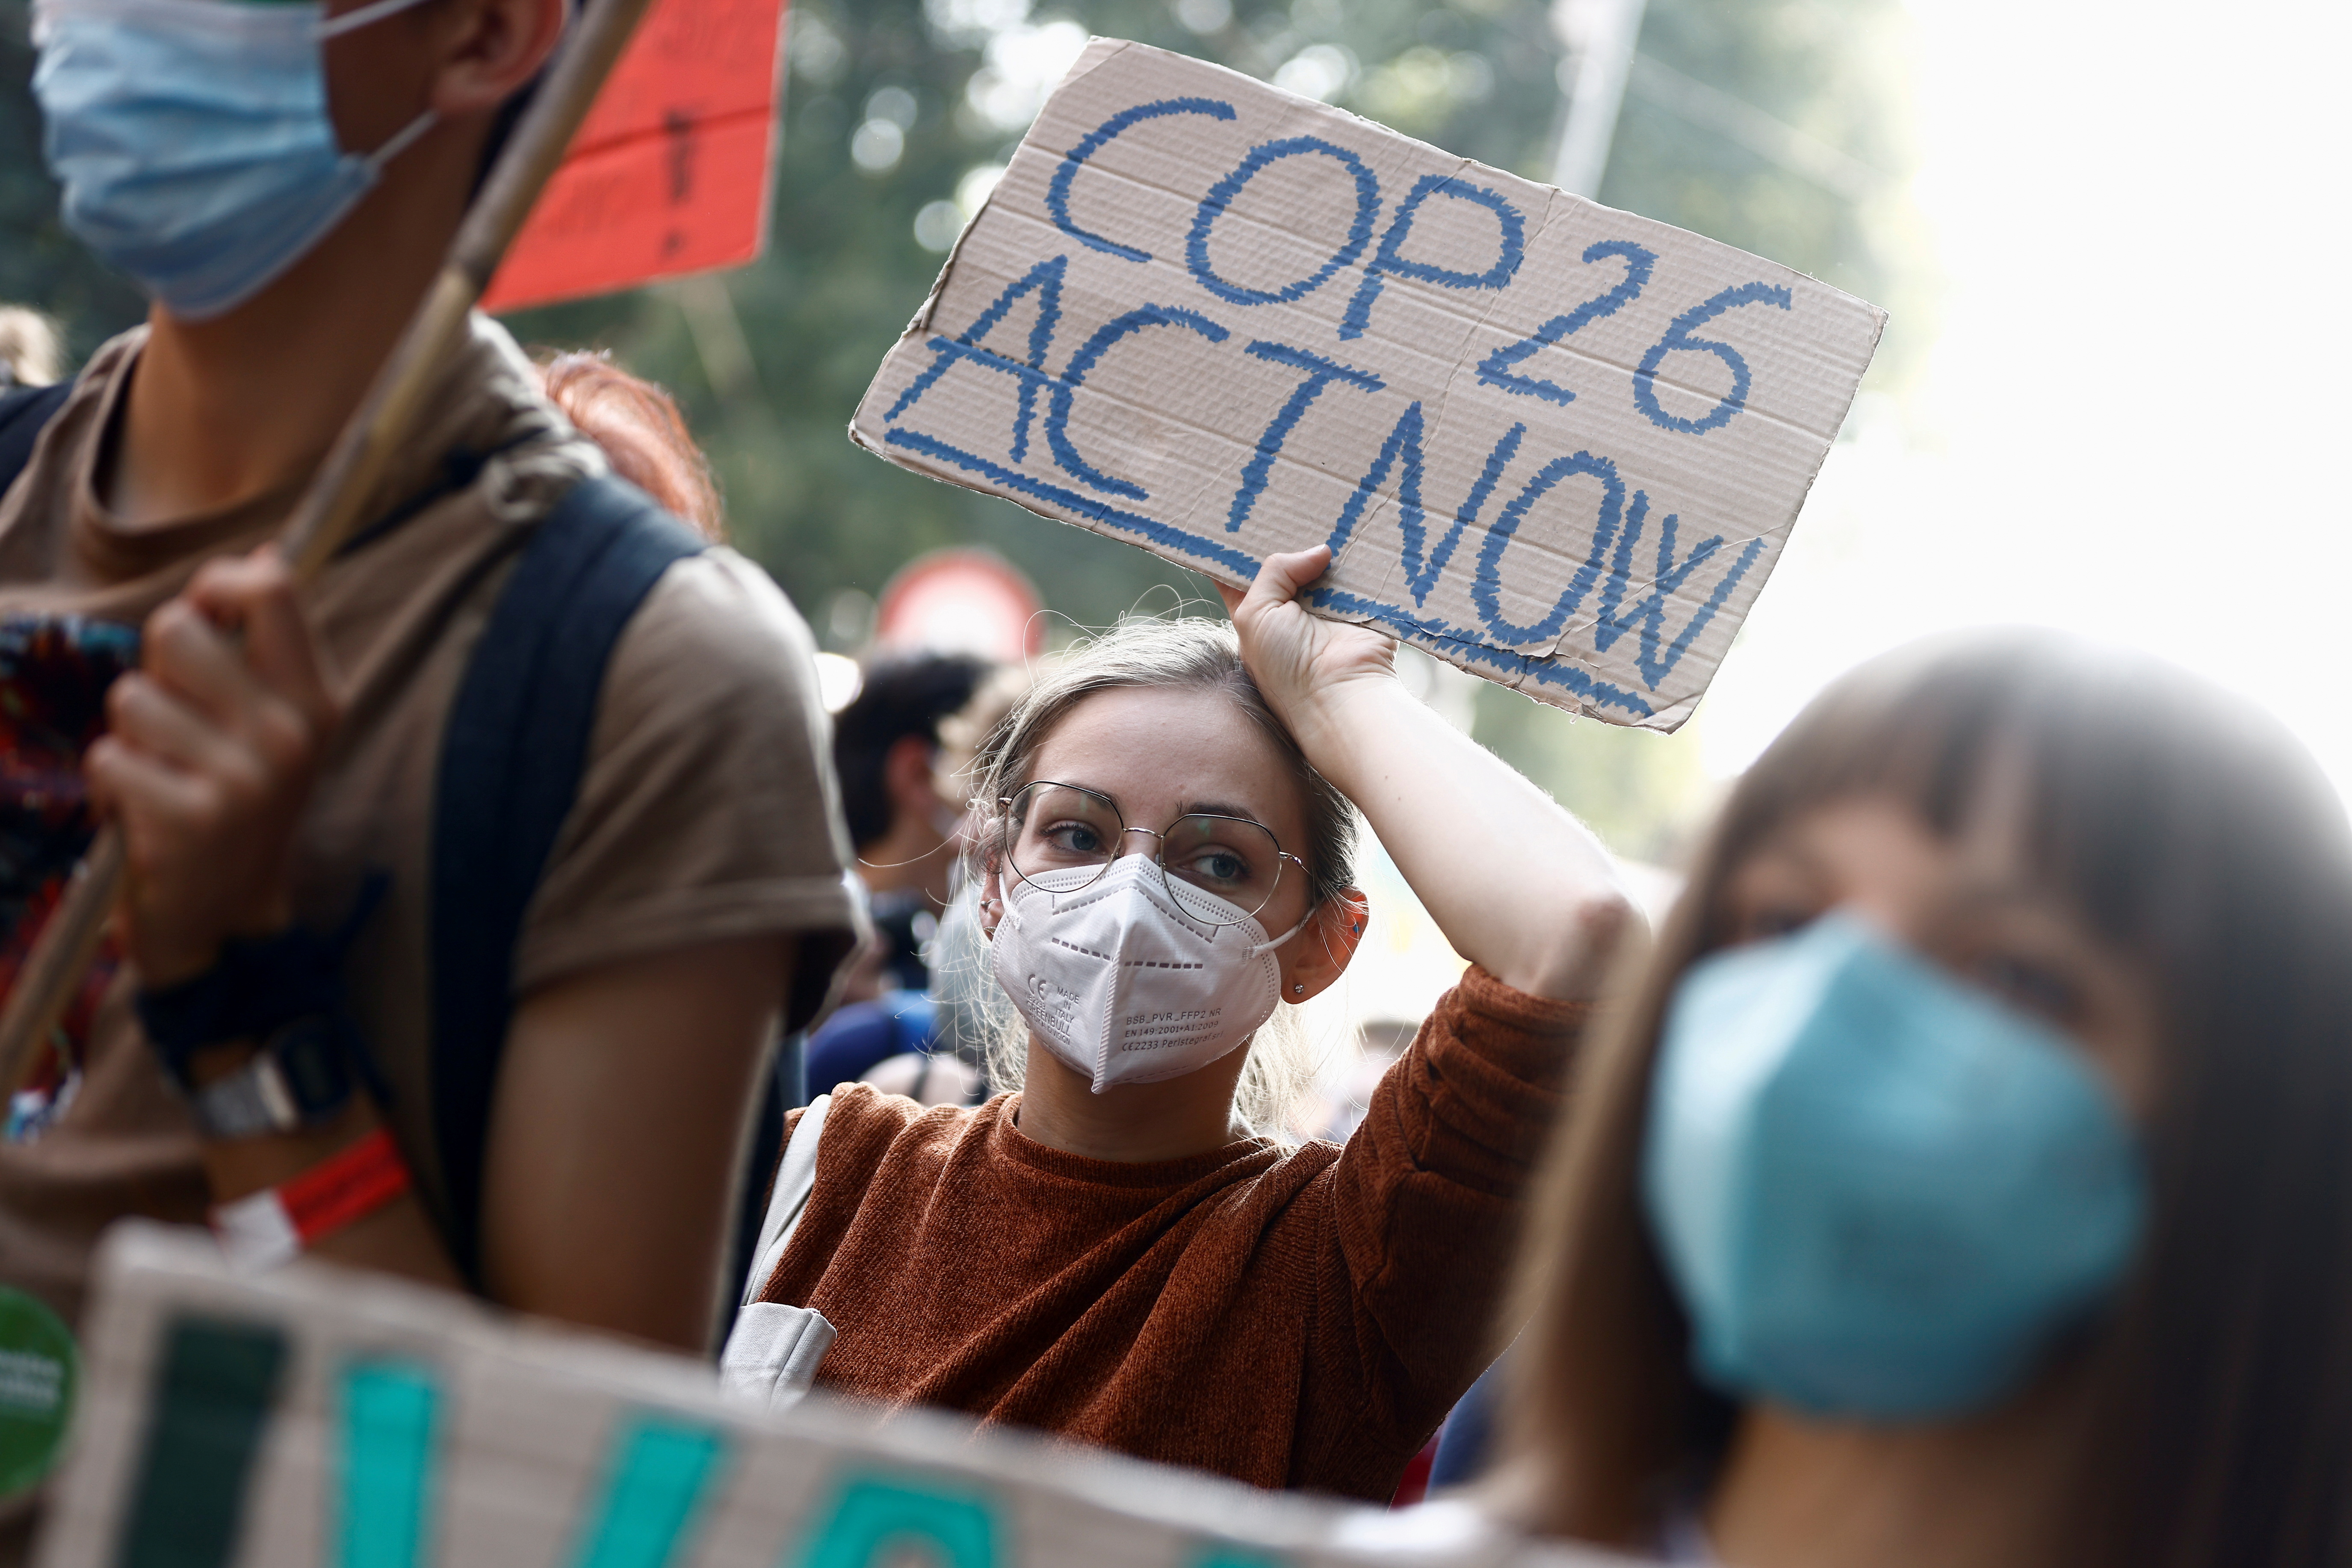 'Global march for climate justice' in Milan